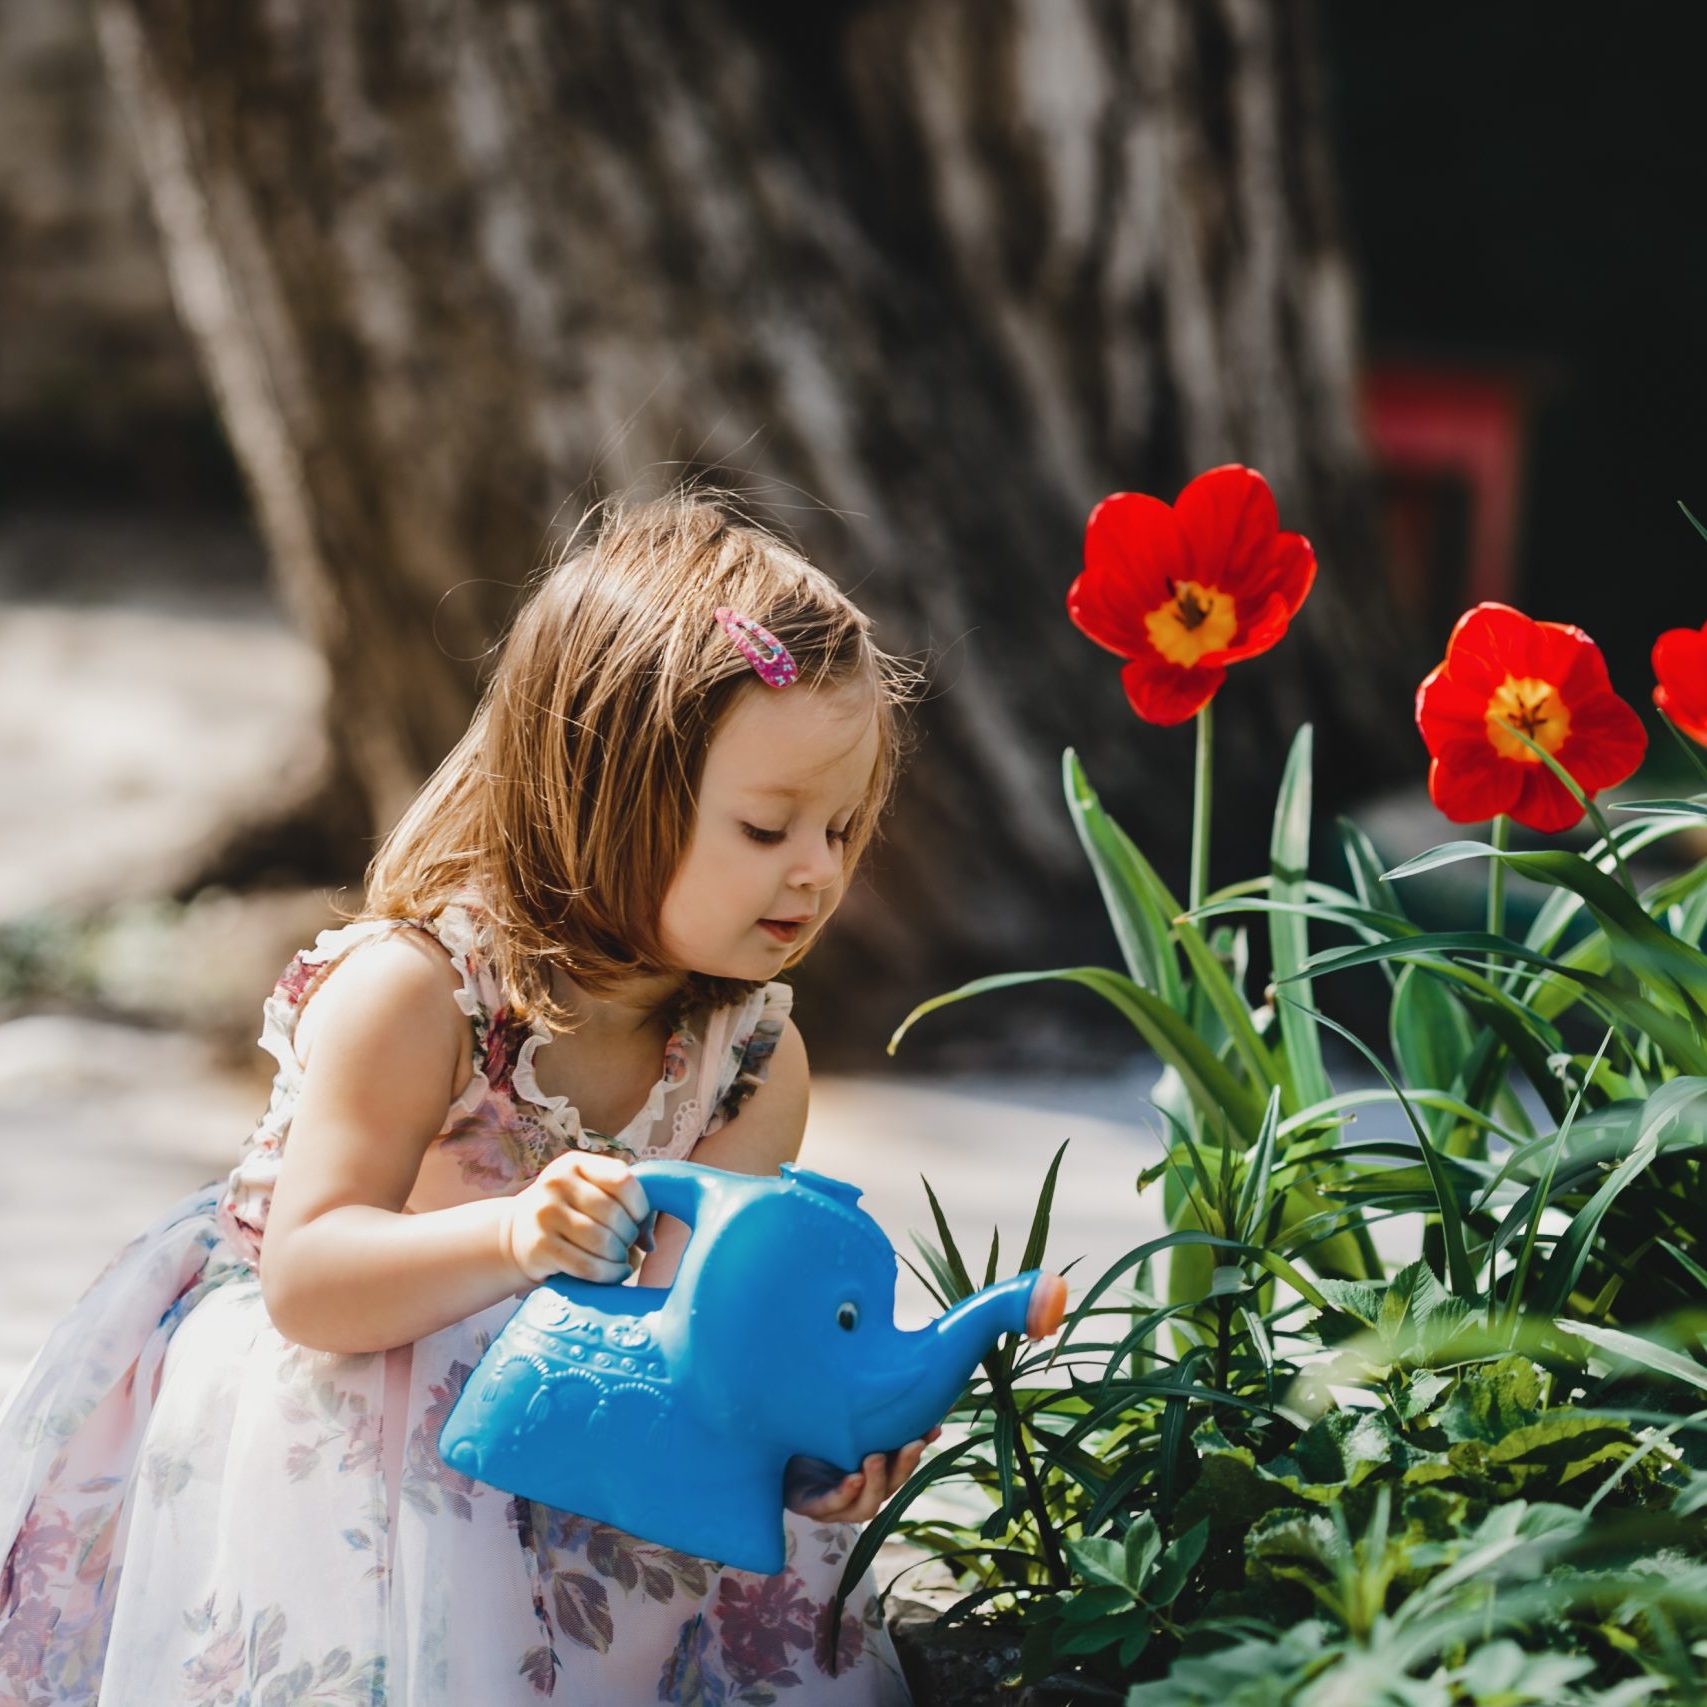 Charming little girl takes care about flowers in the garden